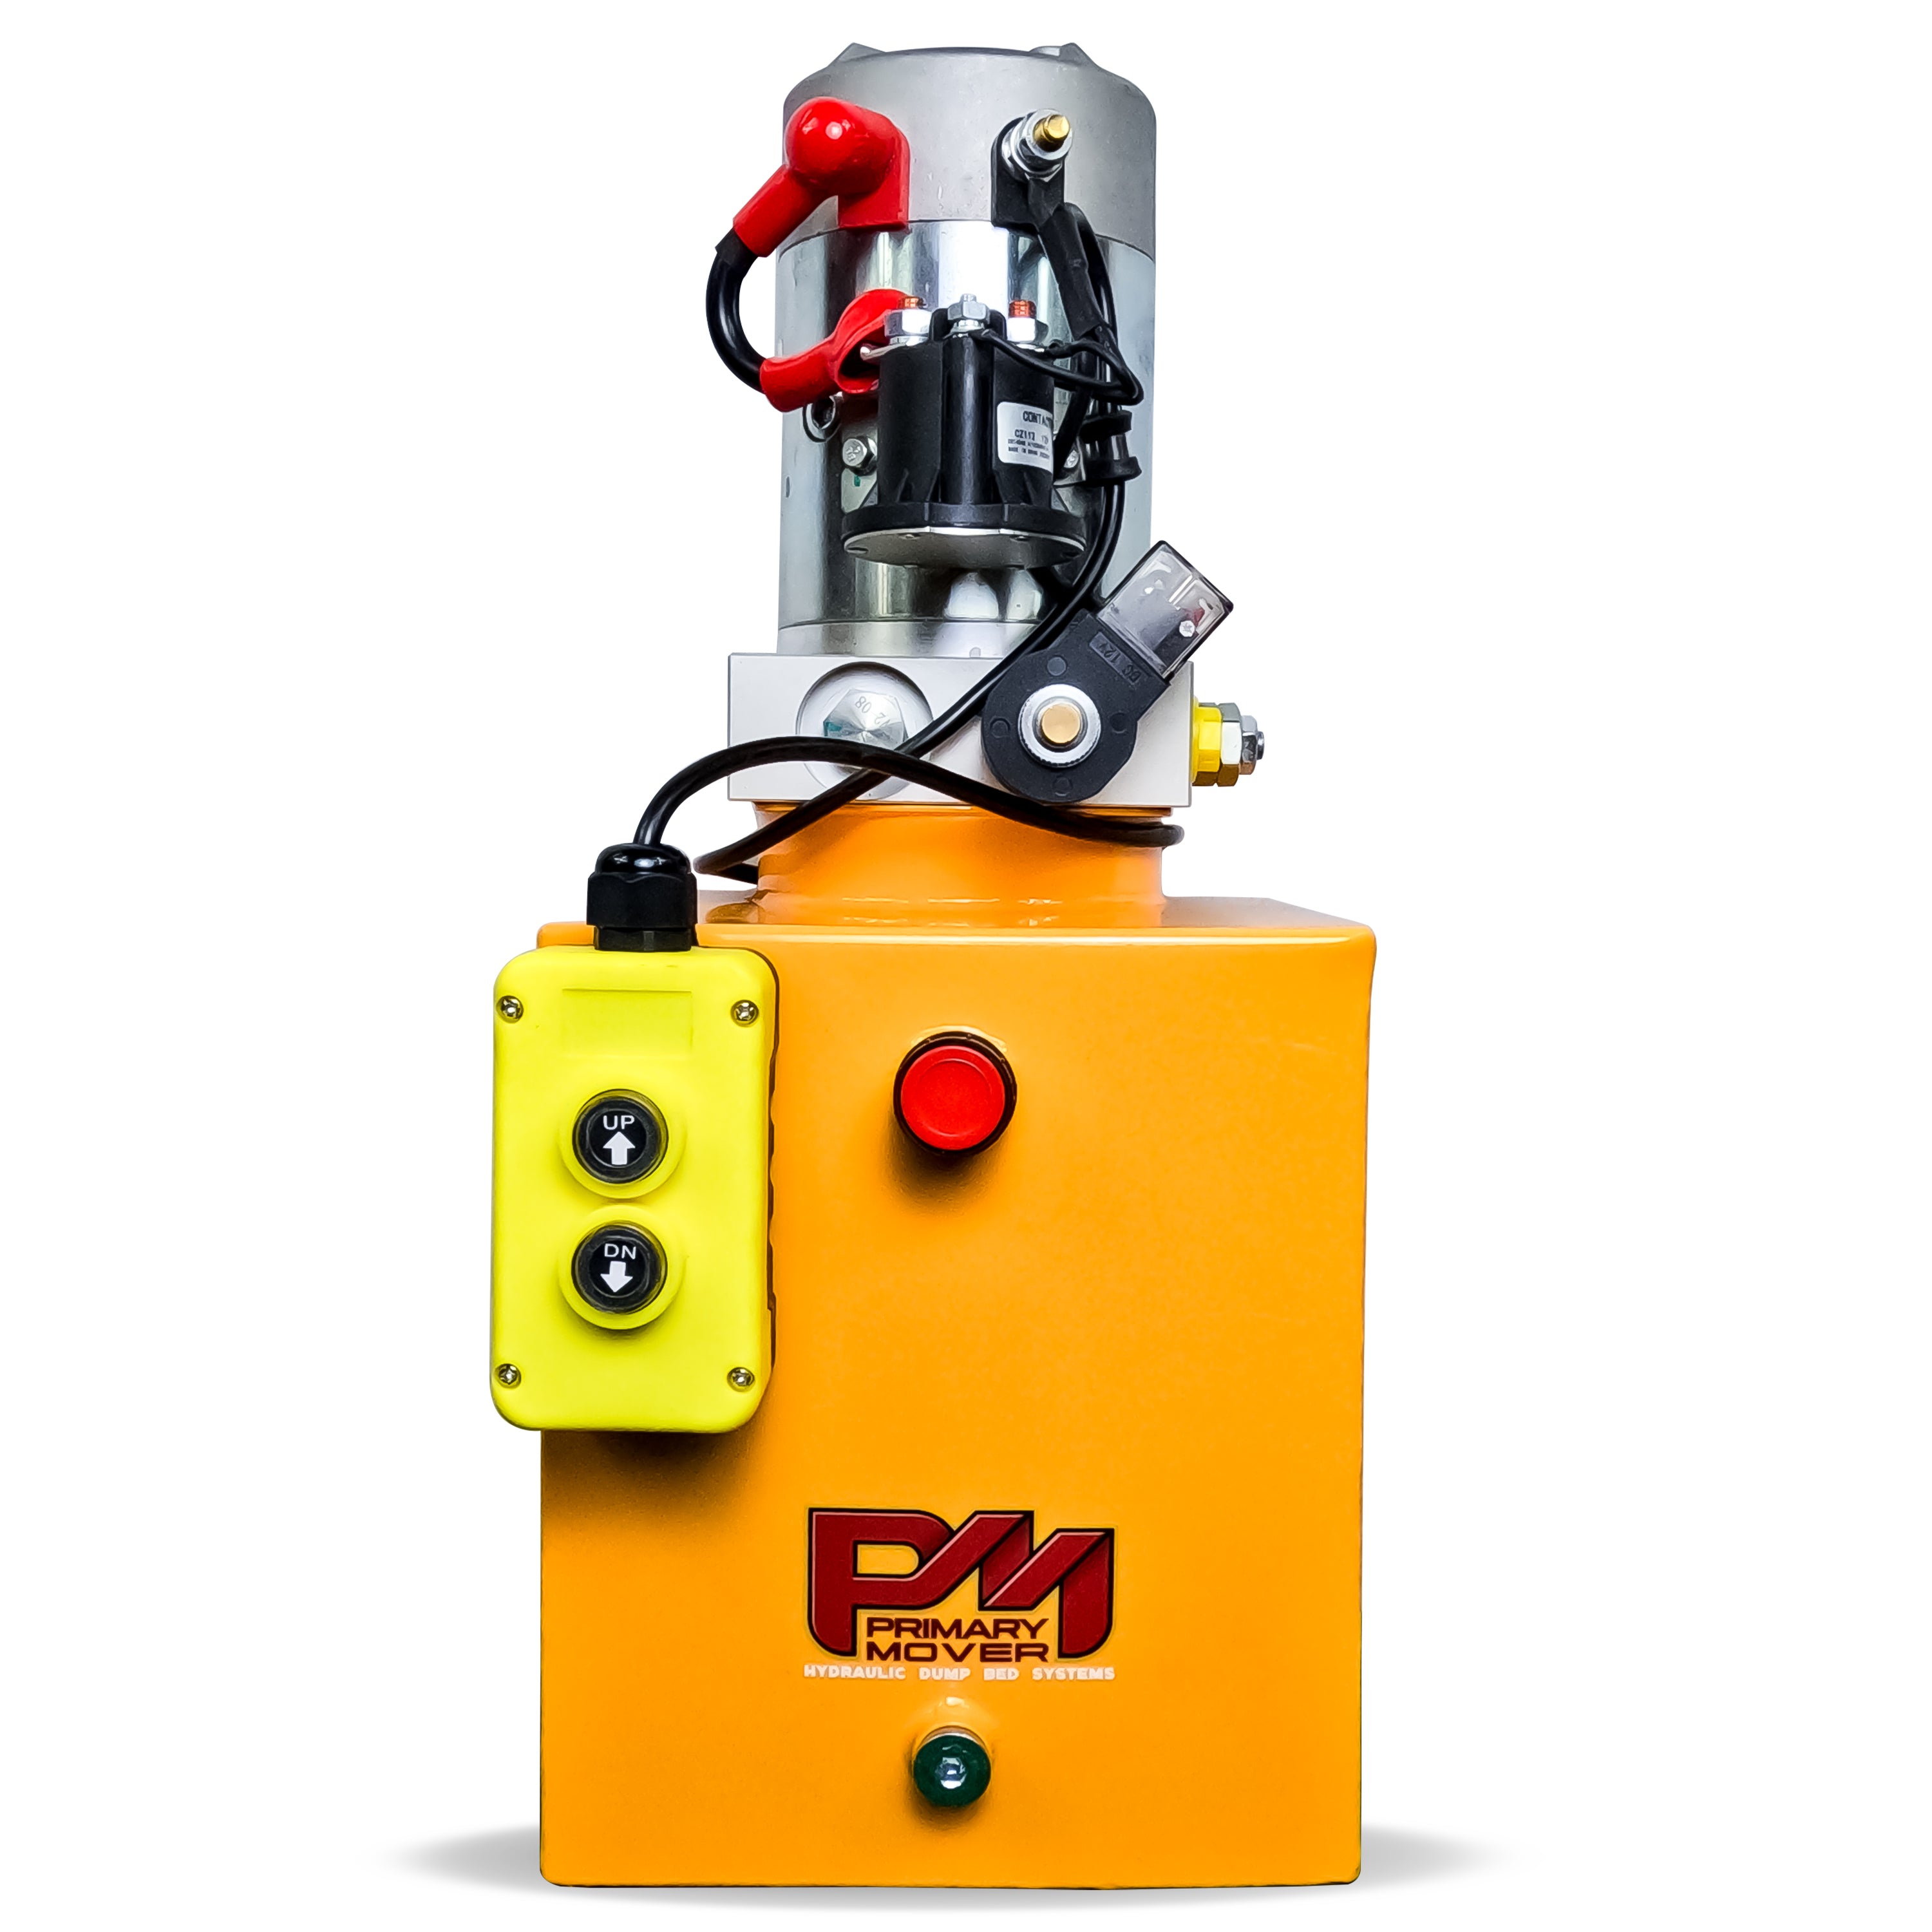 Primary Mover 12V Single-Acting Hydraulic Pump with Steel Reservoir, featuring red buttons and a yellow machine for efficient dump bed systems.